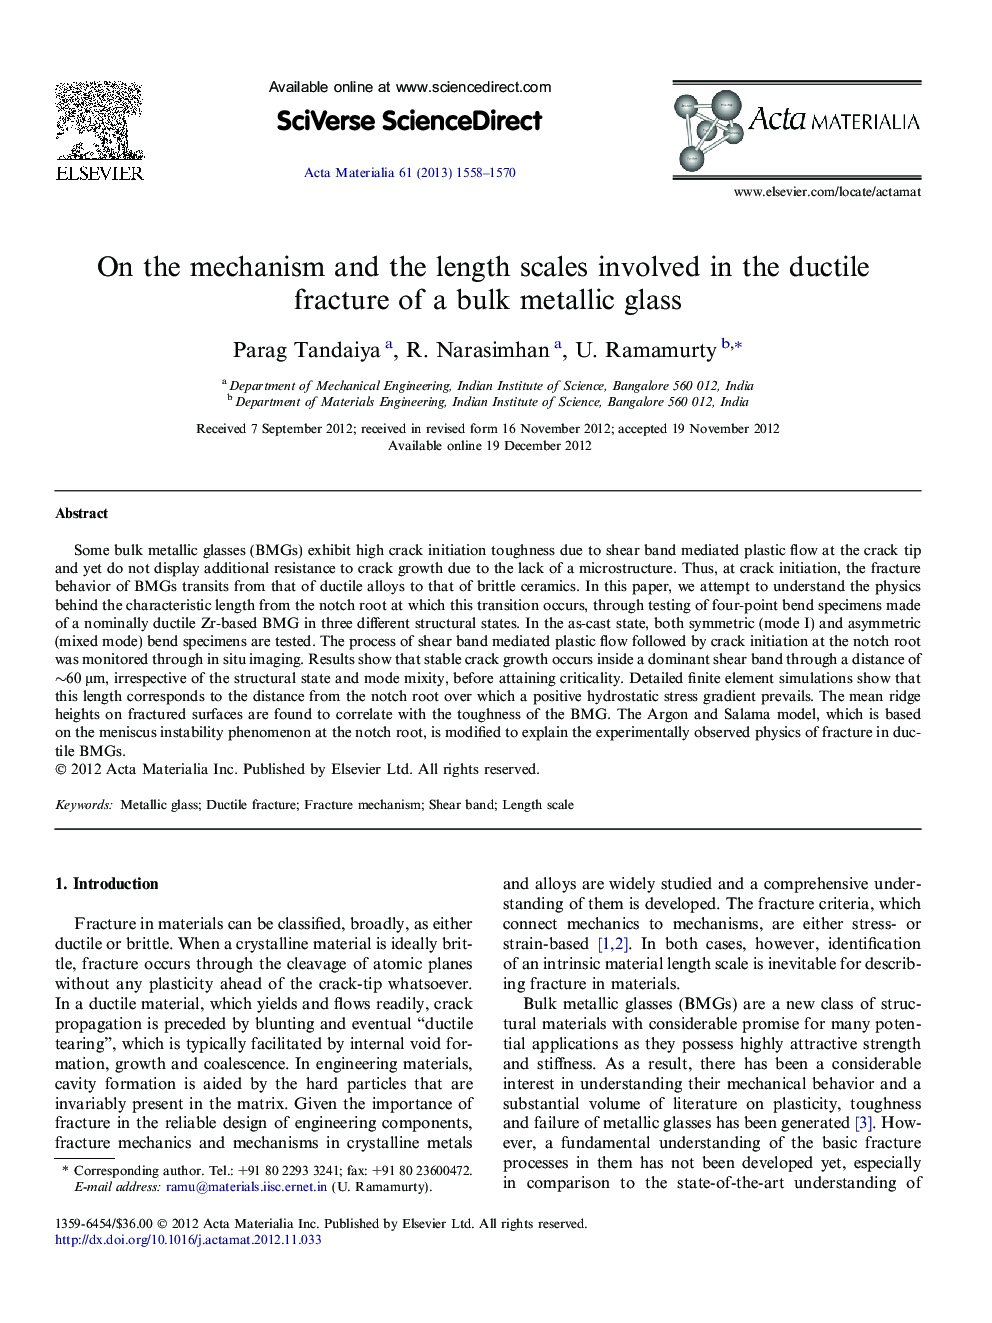 On the mechanism and the length scales involved in the ductile fracture of a bulk metallic glass